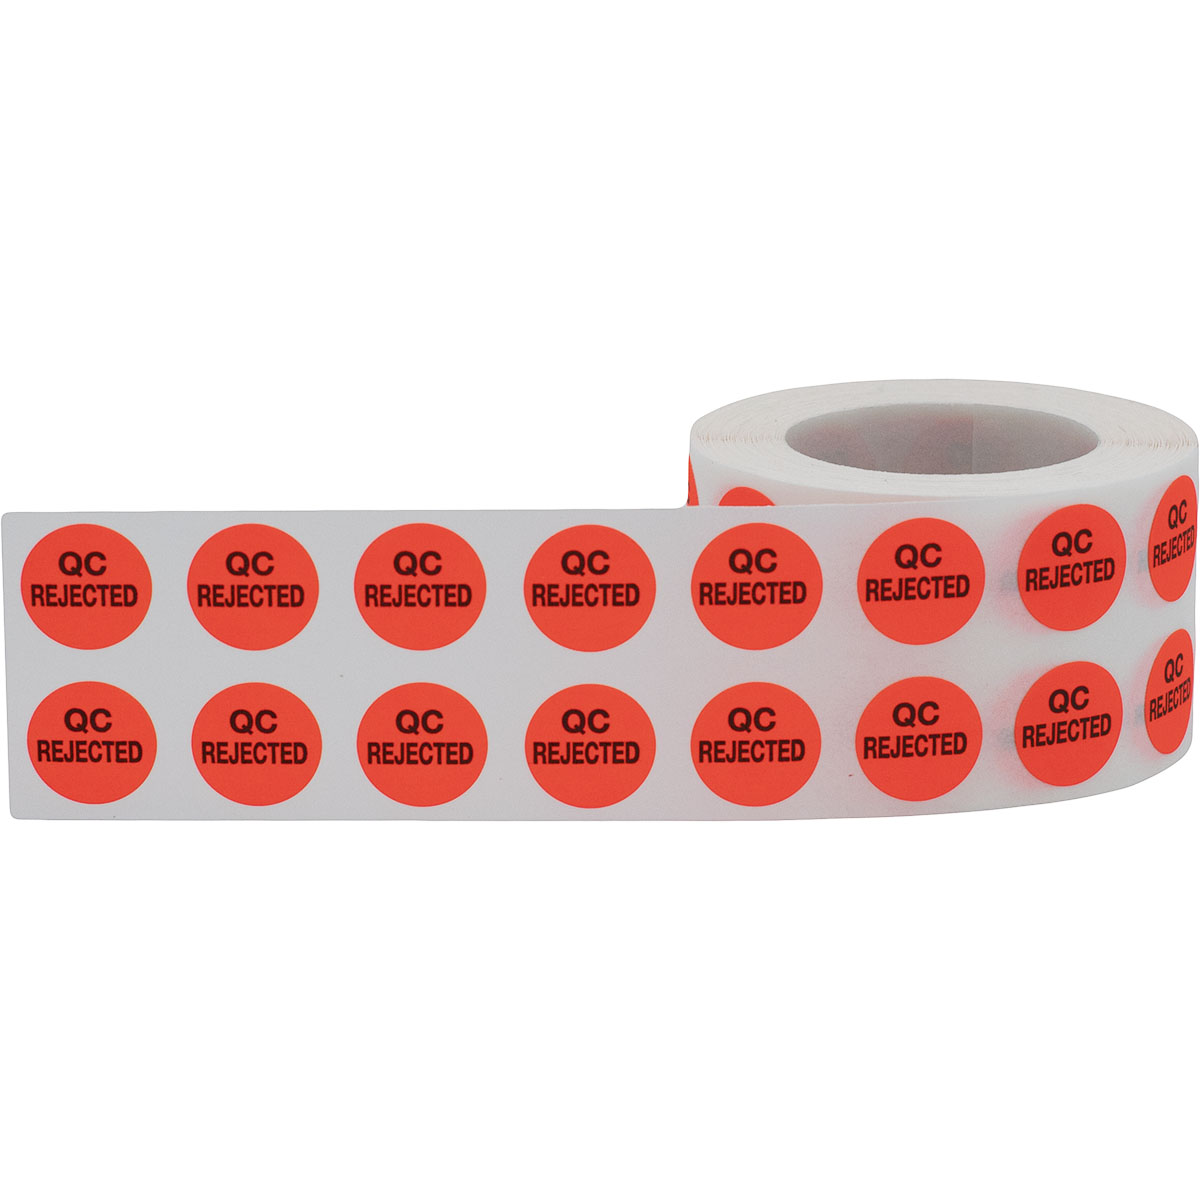 What You Should Know About Buying Bulk Stickers - In Stock Labels